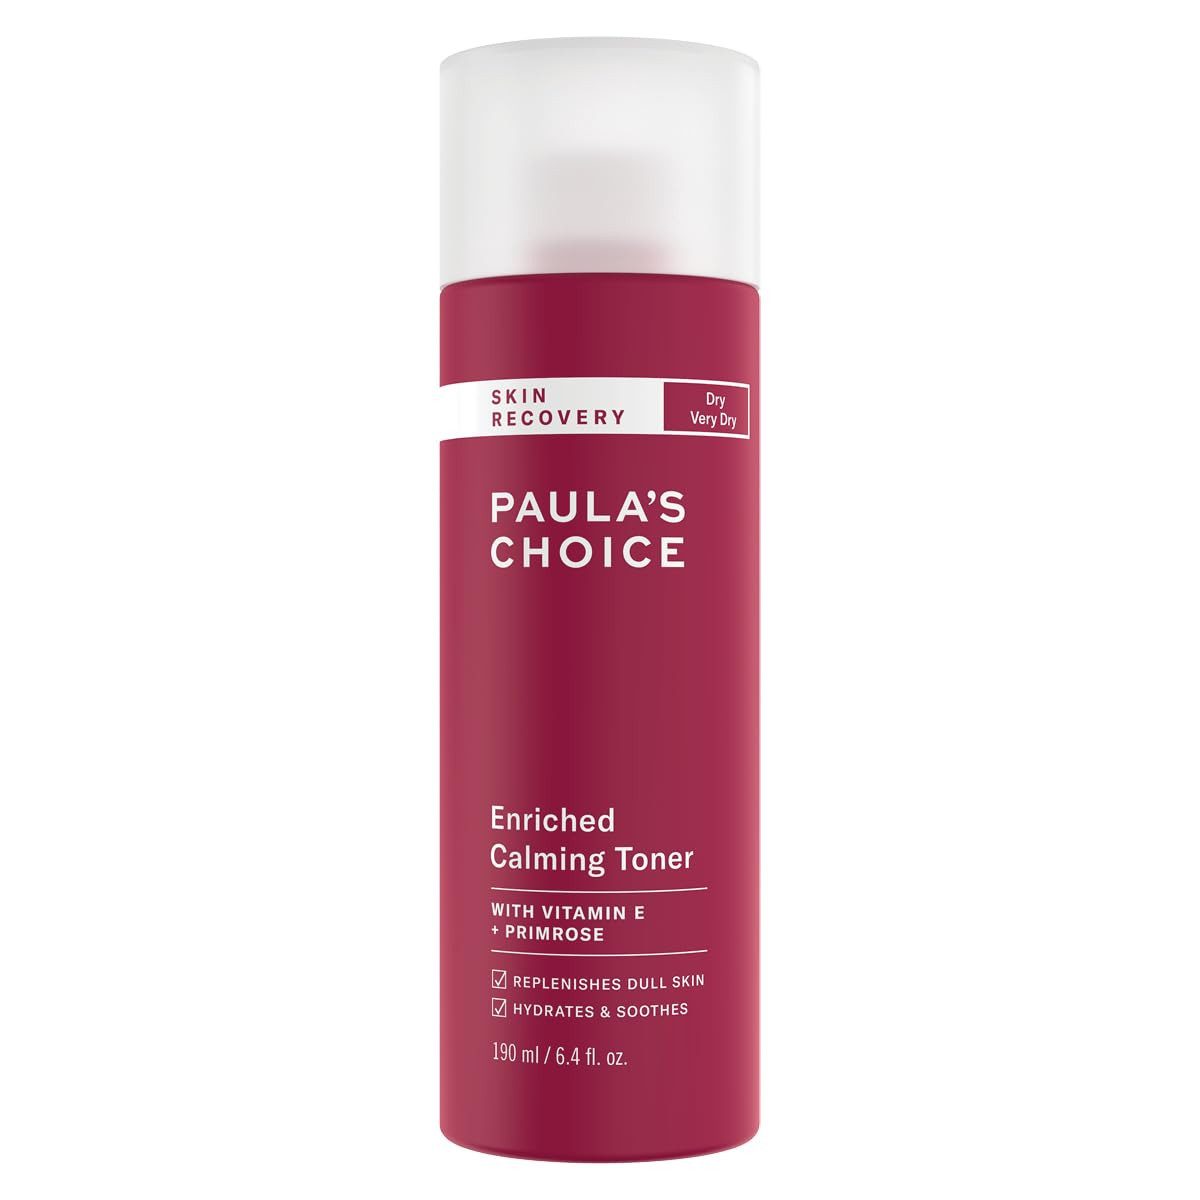 Paula's Choice Gesichtslotion SKIN RECOVERY Lotion – Hydratisierend Milchig Gesichtswasser, 1-tlg.